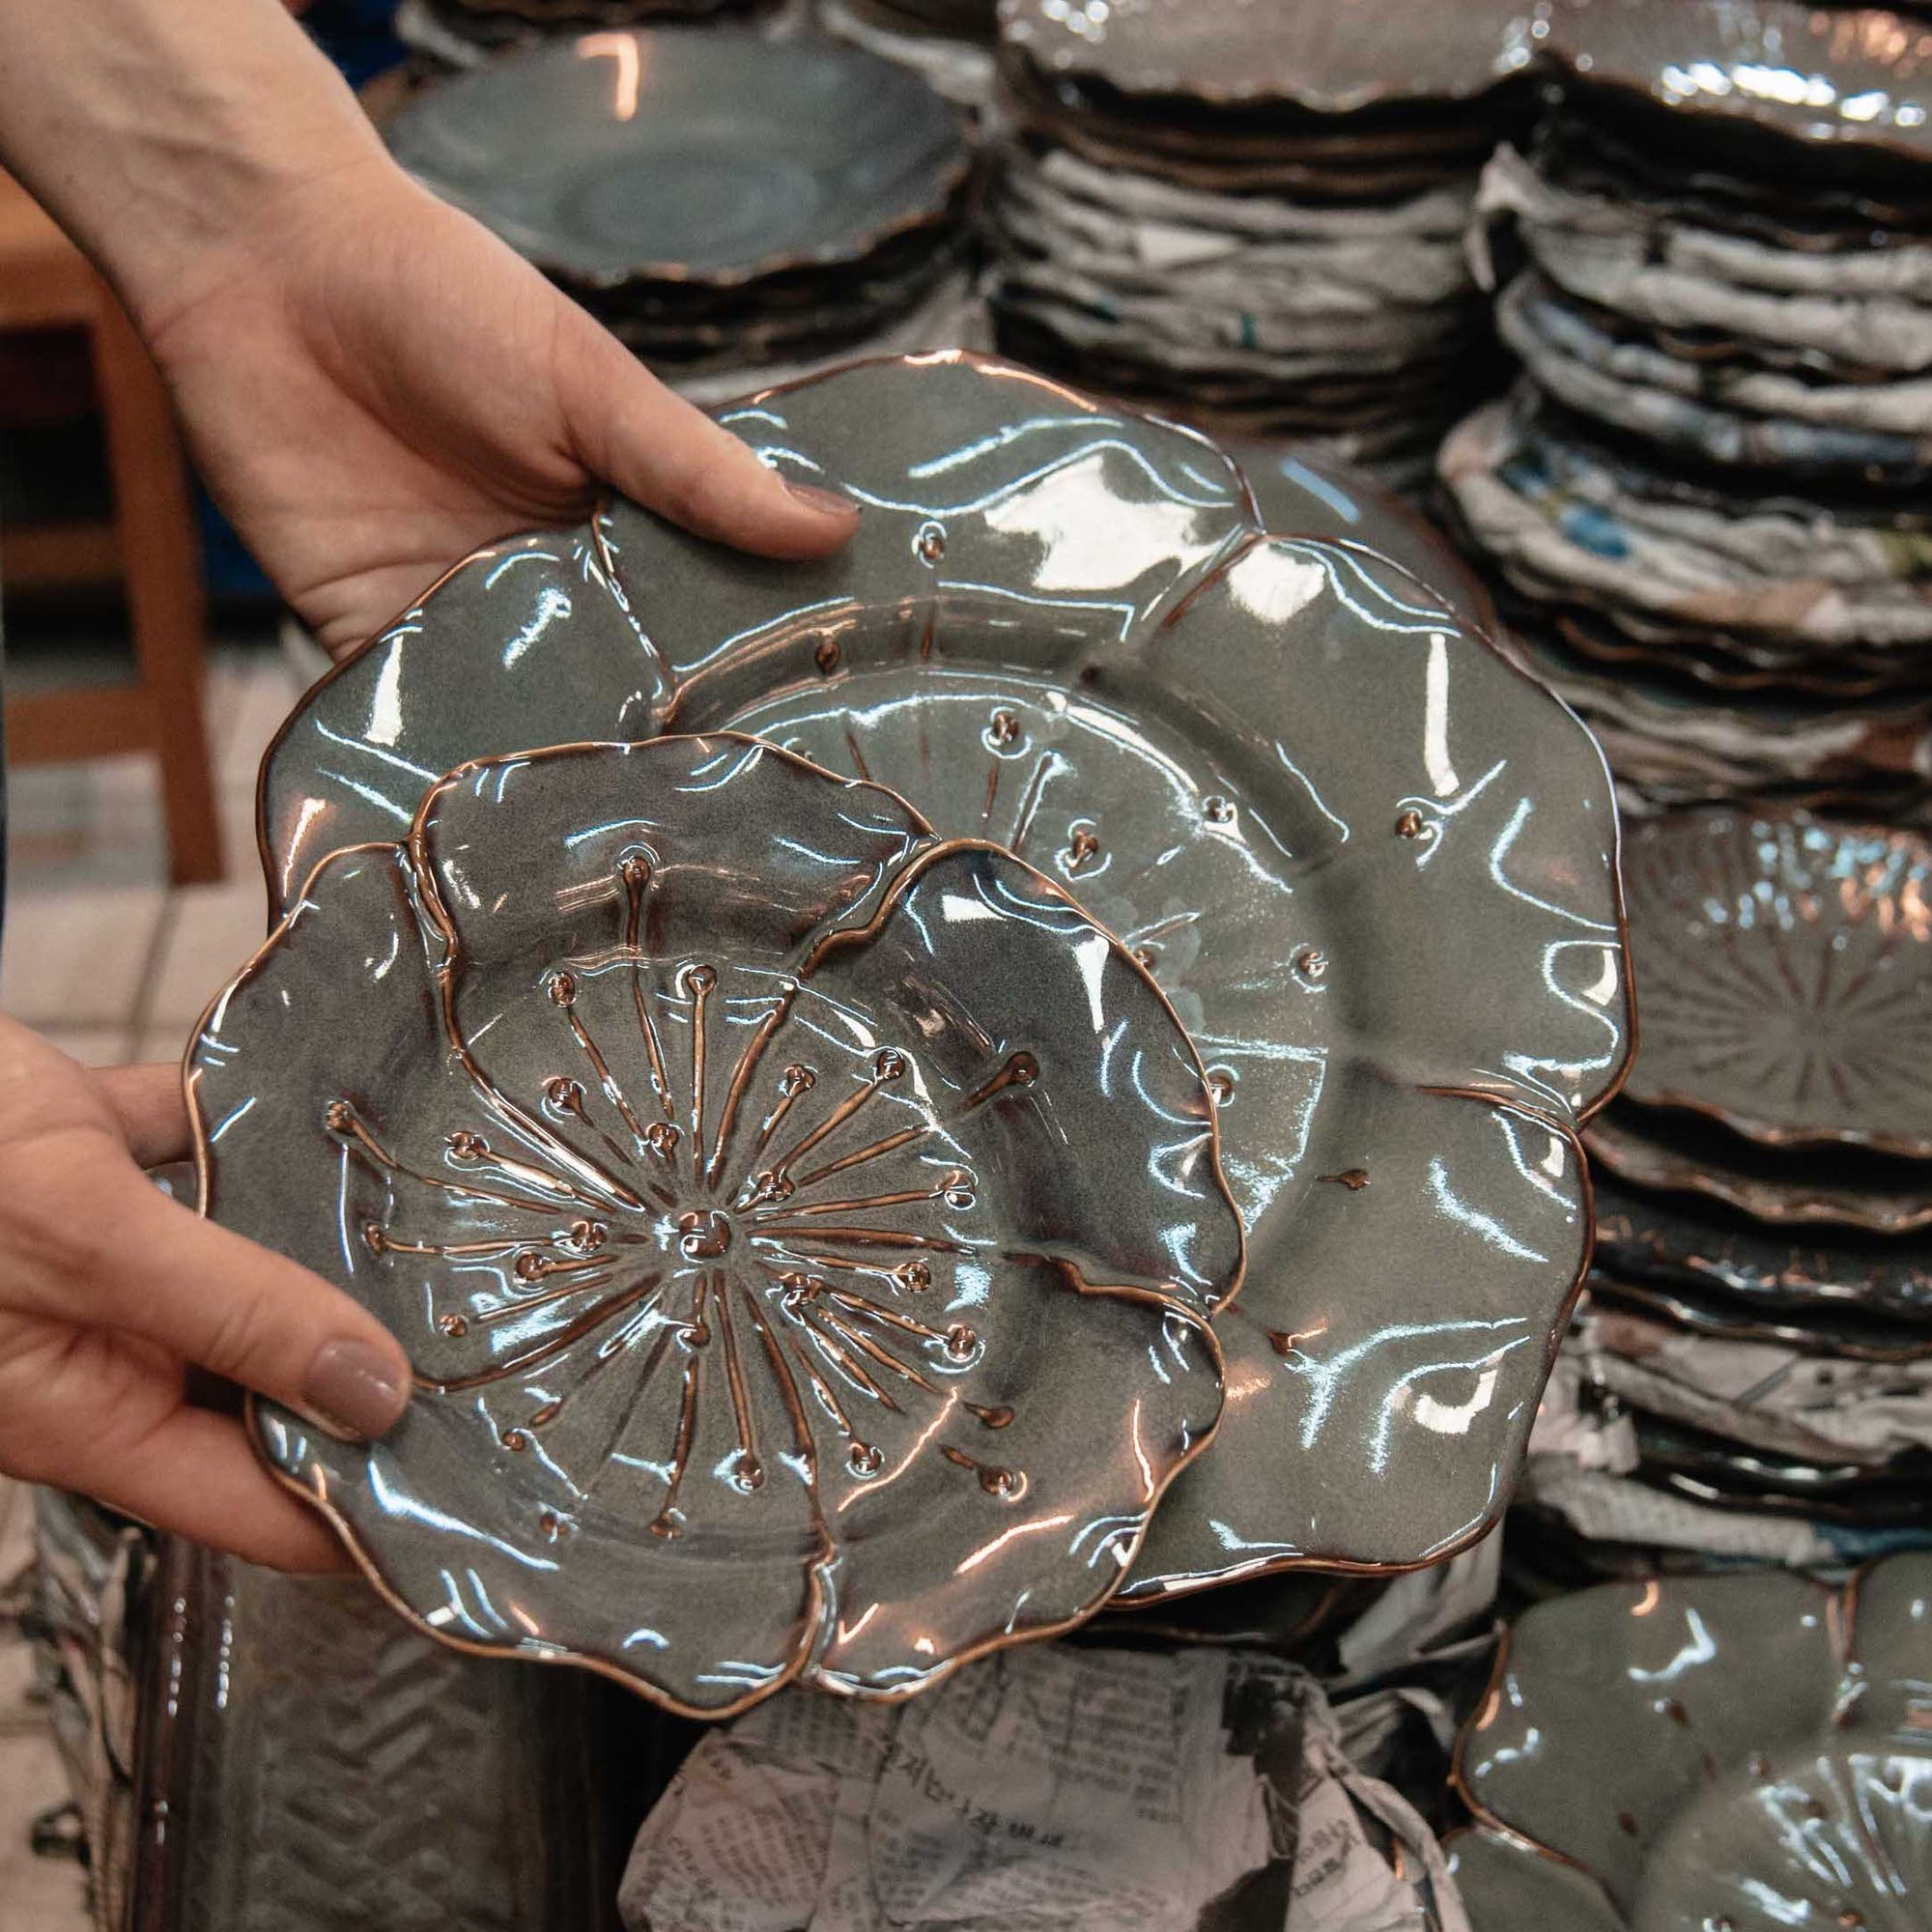 Hands holding up teal ceramic plates with designs on them